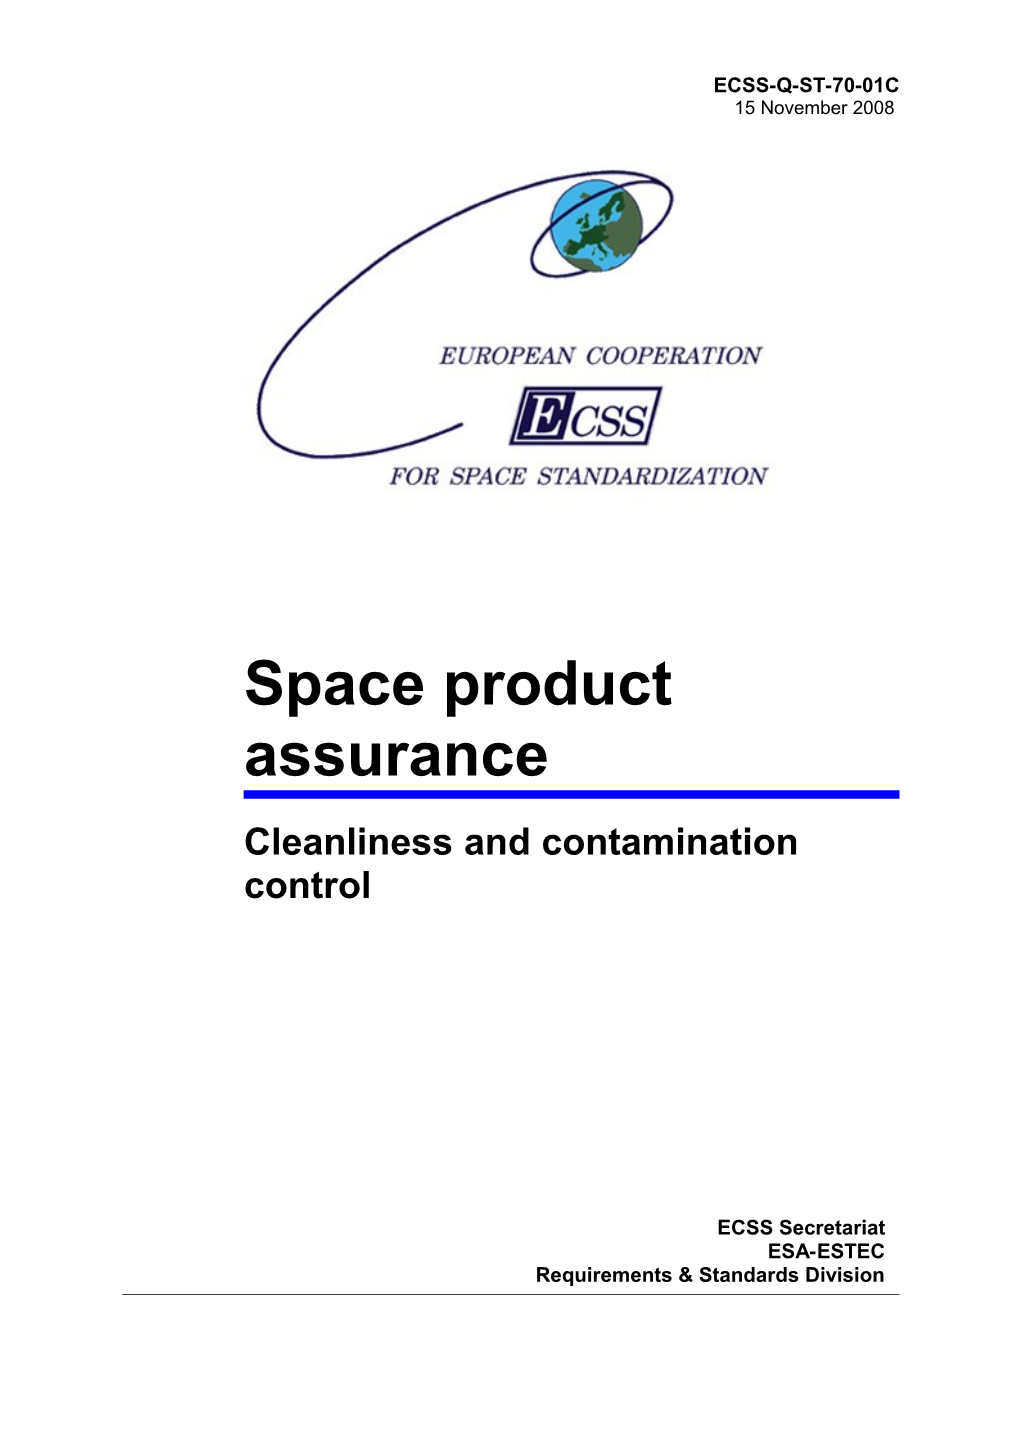 Cleanliness and Contamination Control